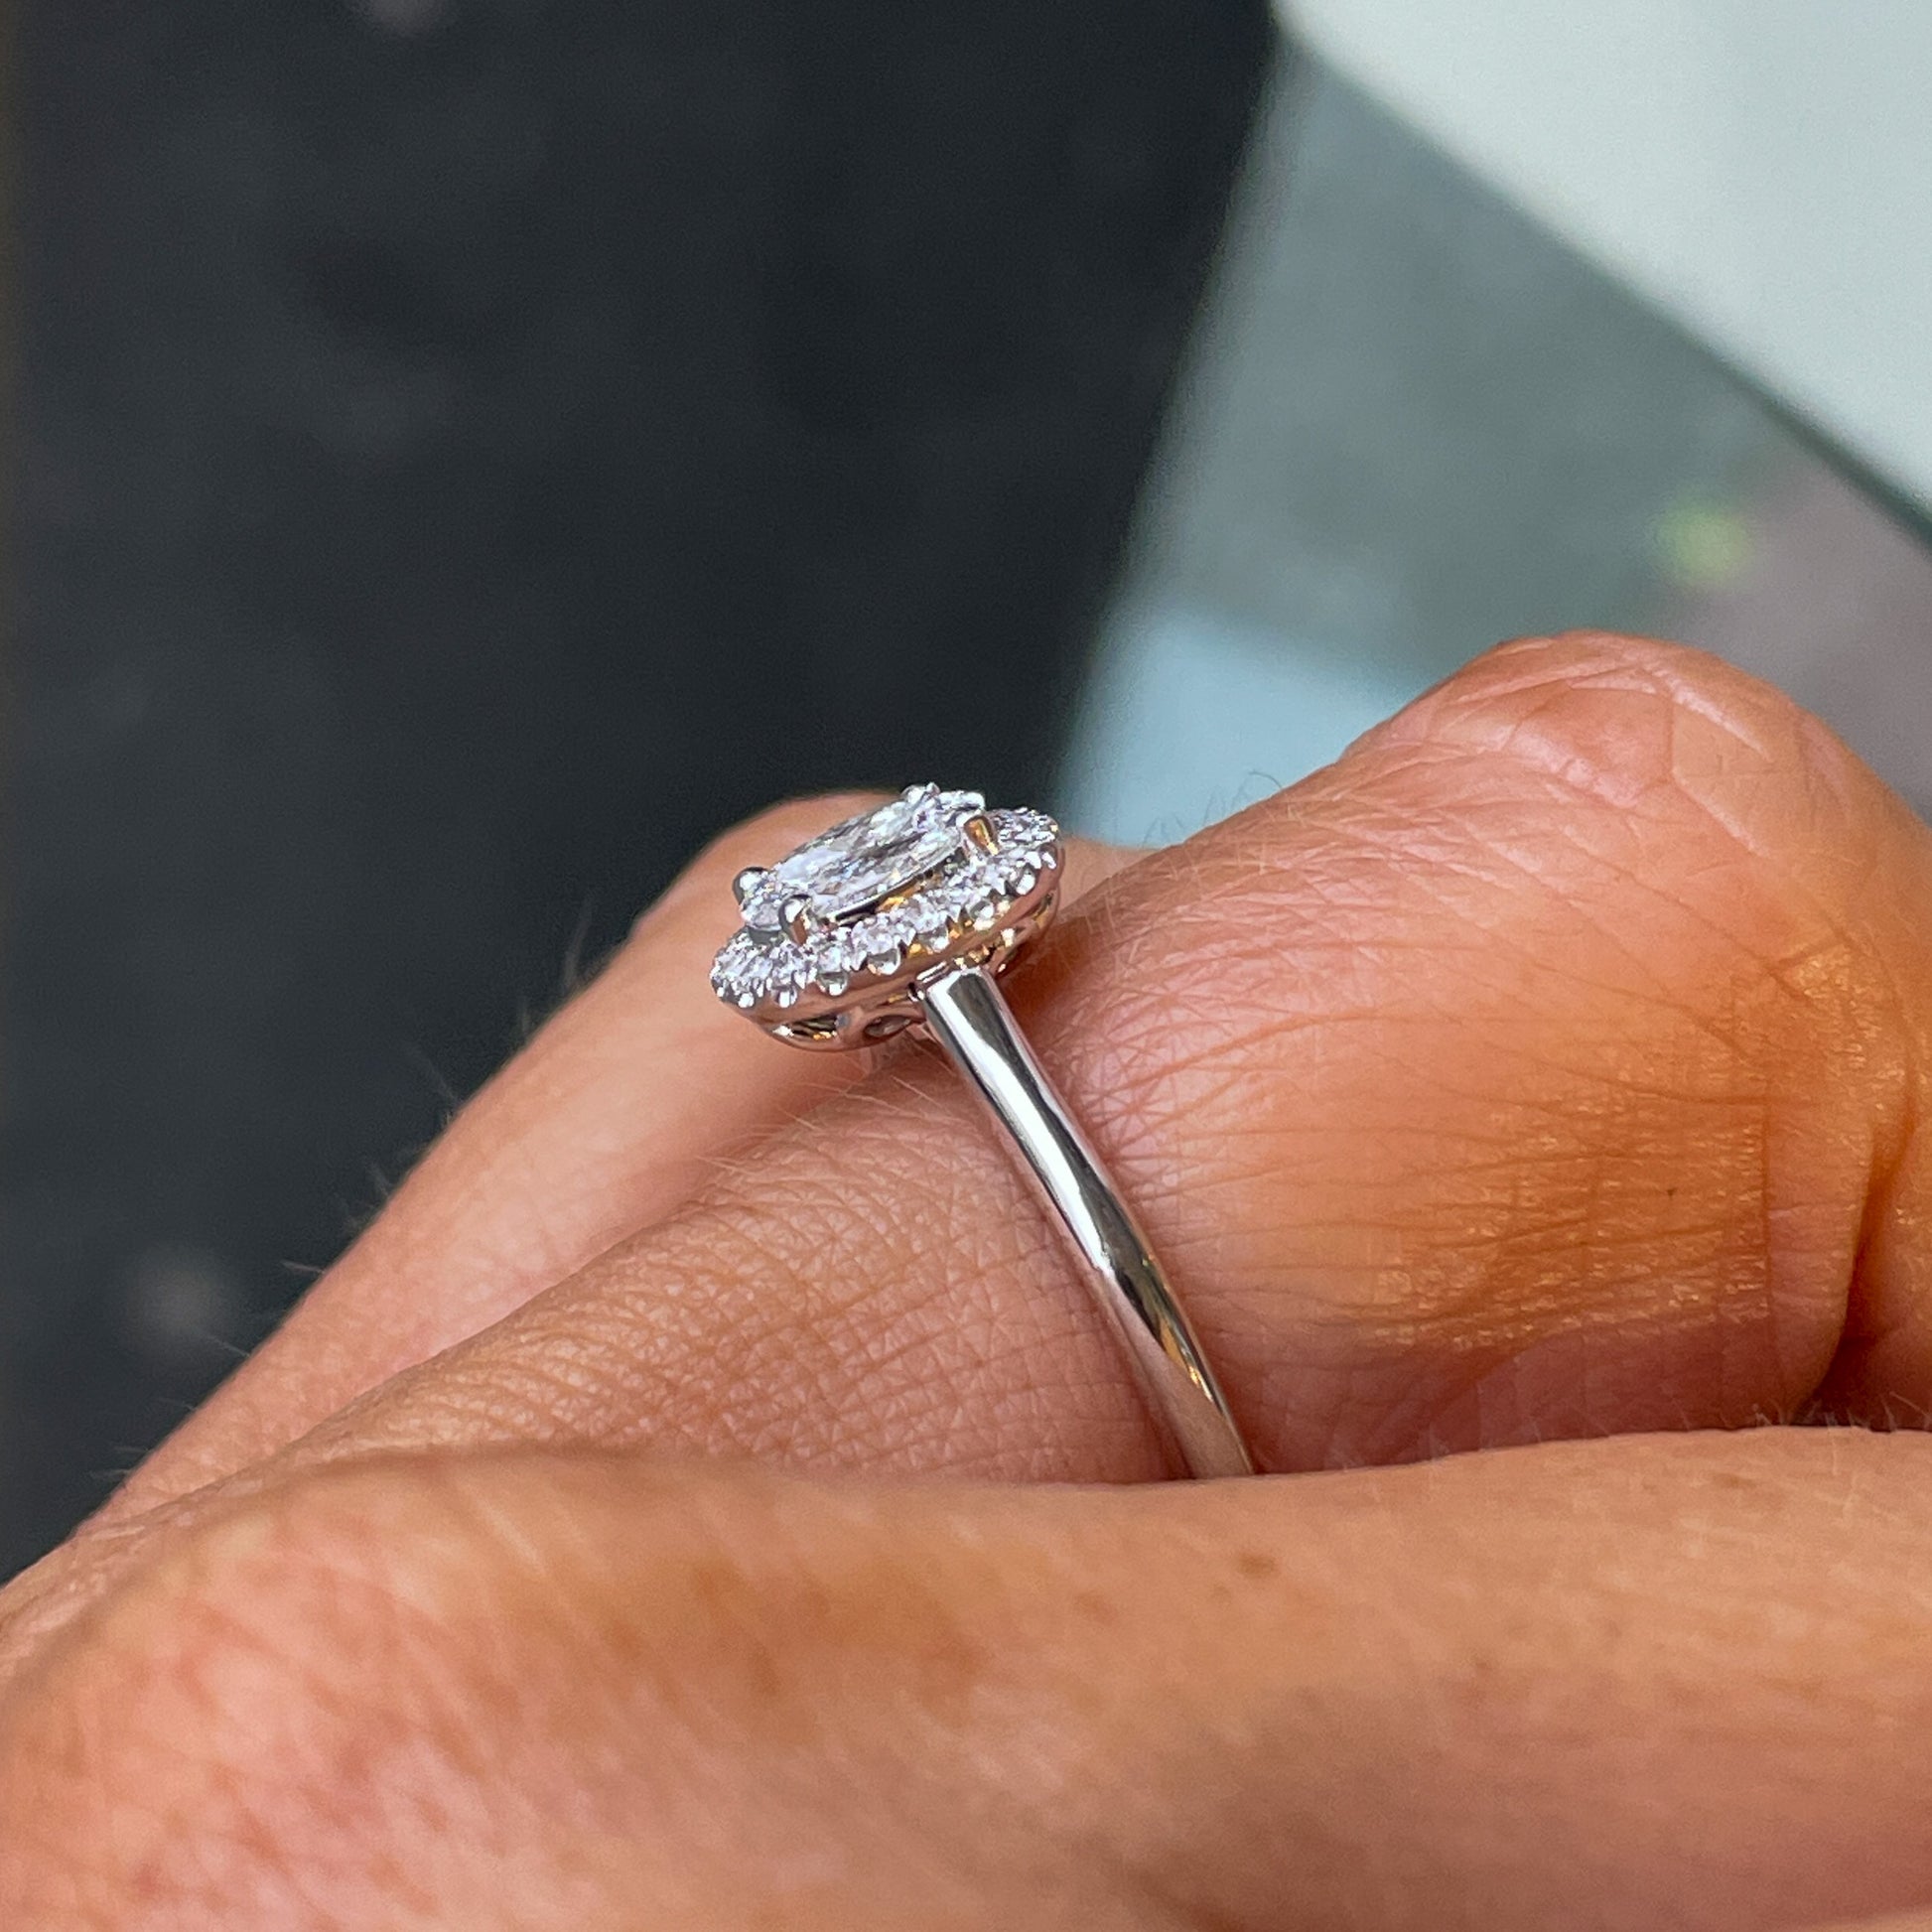 18ct White Gold Oval Cluster Diamond Engagement Ring | 0.53ct - John Ross Jewellers